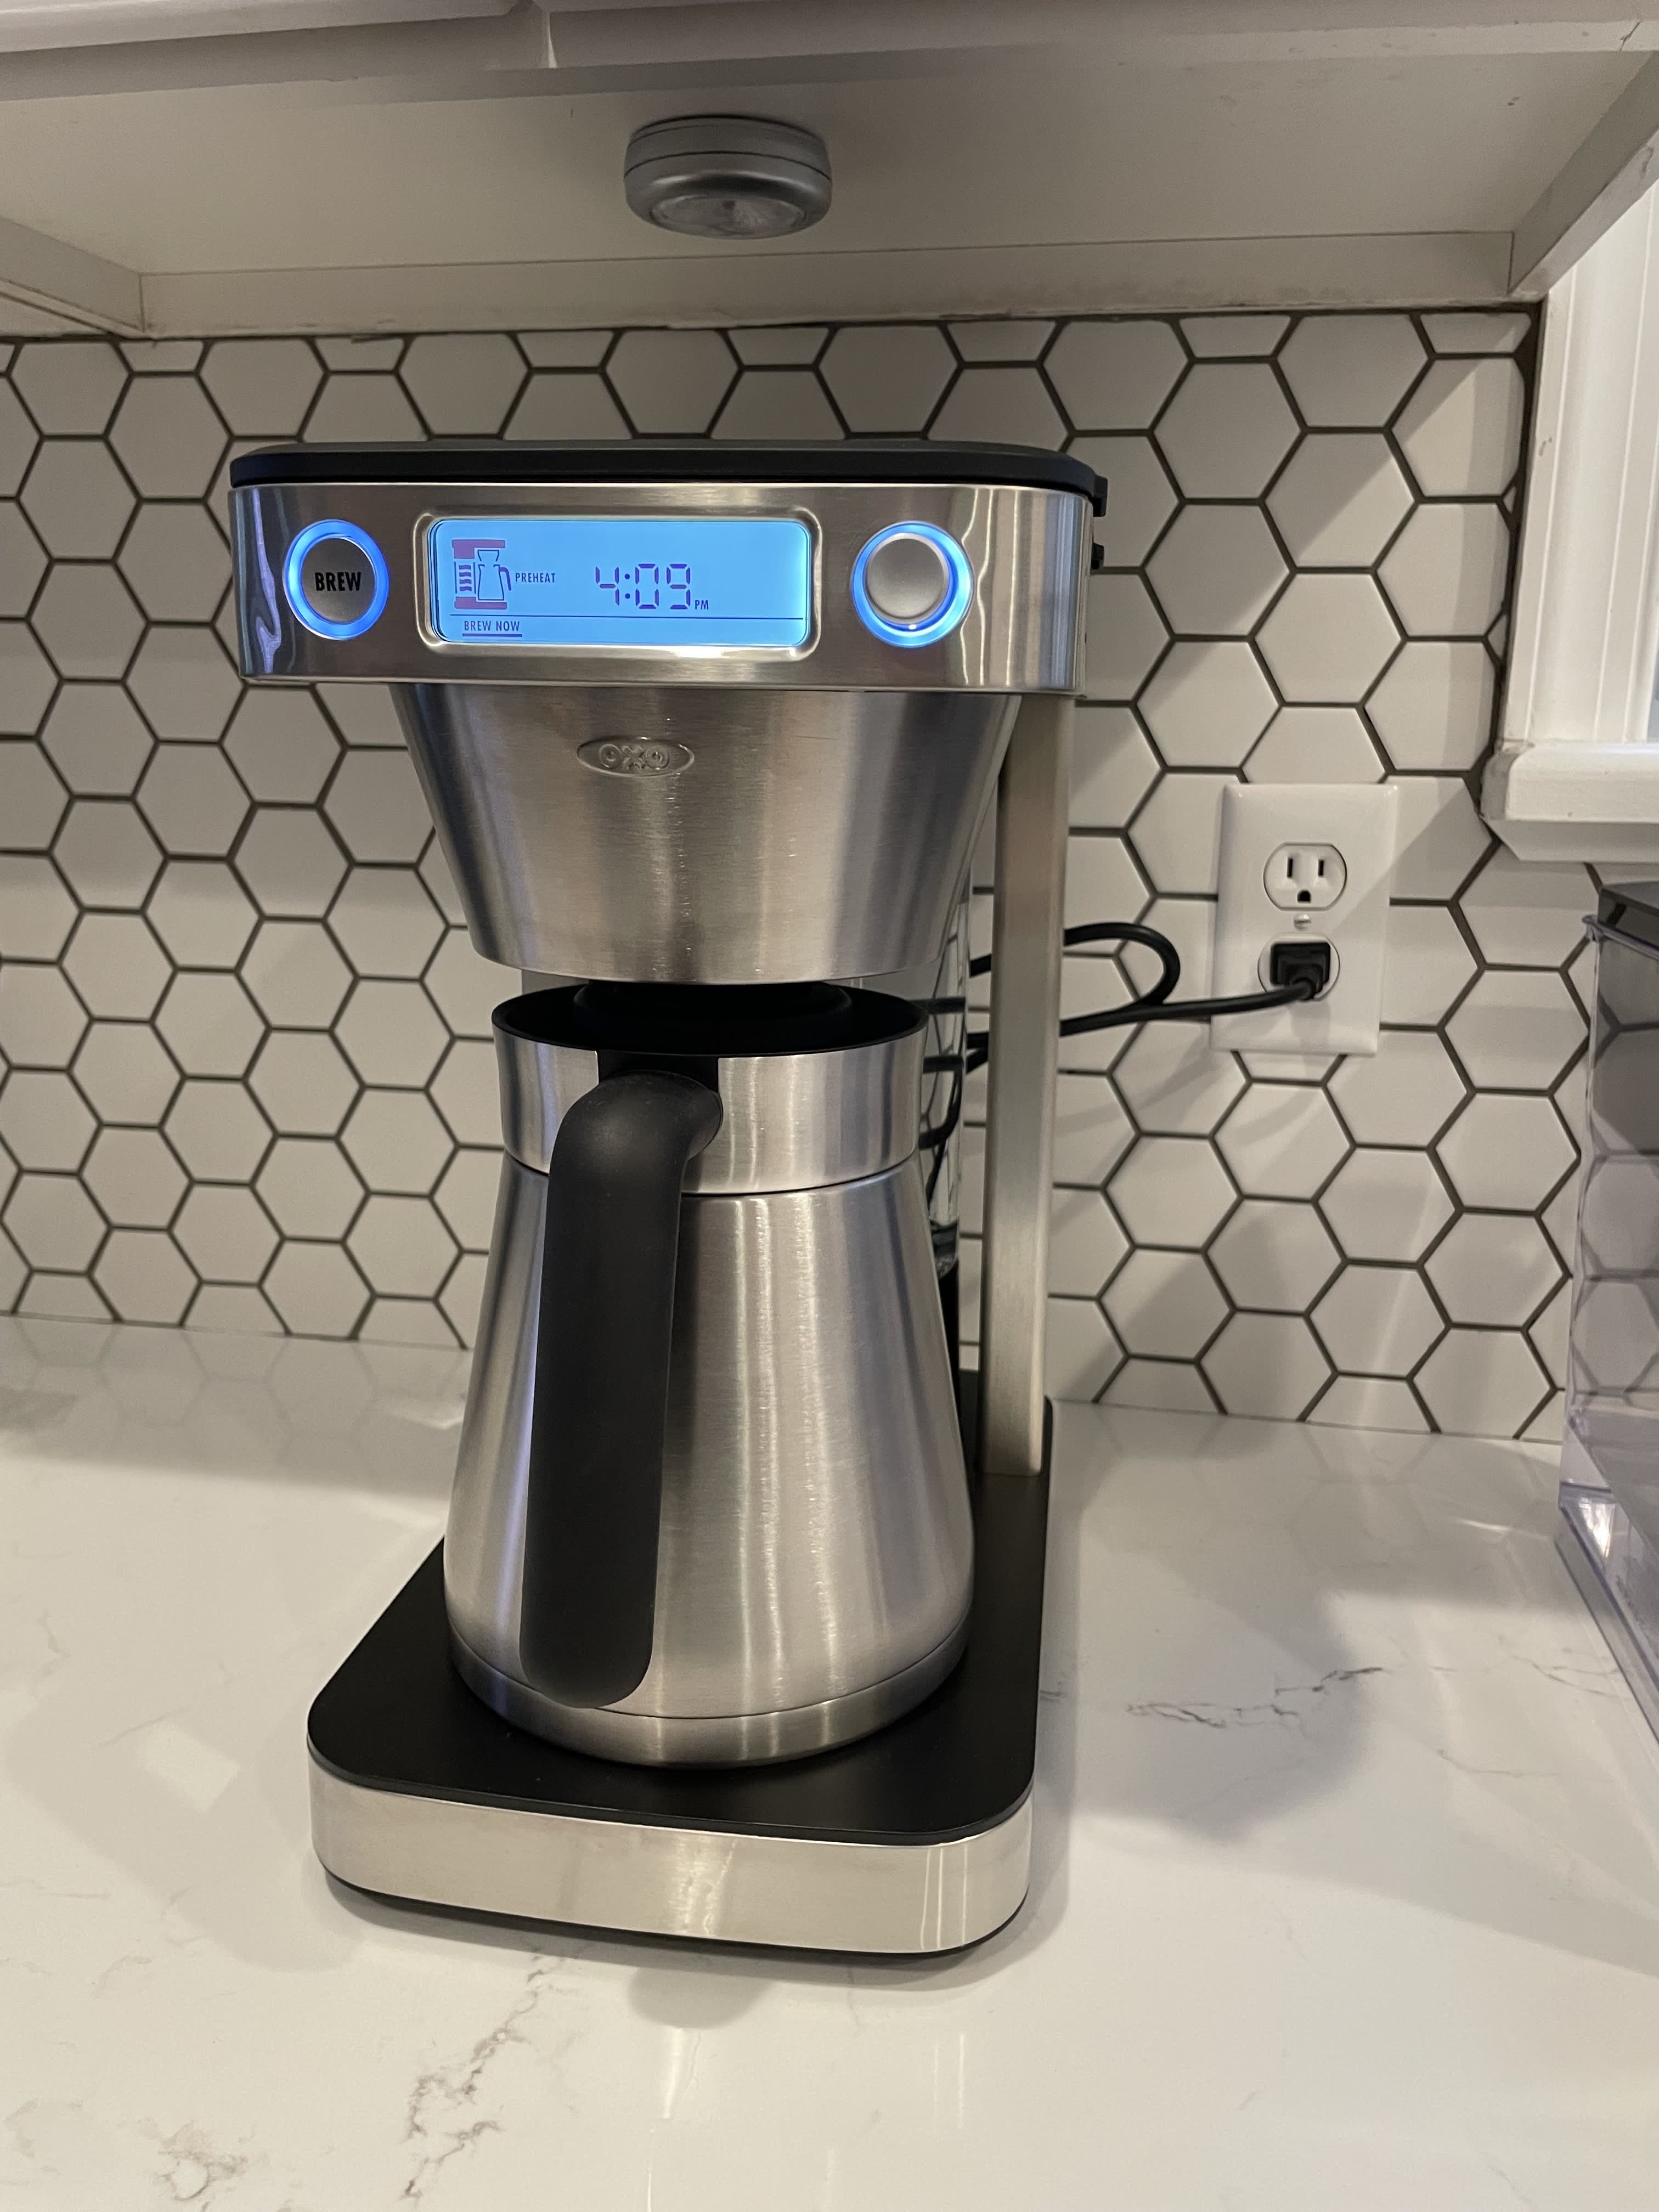 We Tested OXO 12-Cup Coffee Maker — Here Are Our Thoughts